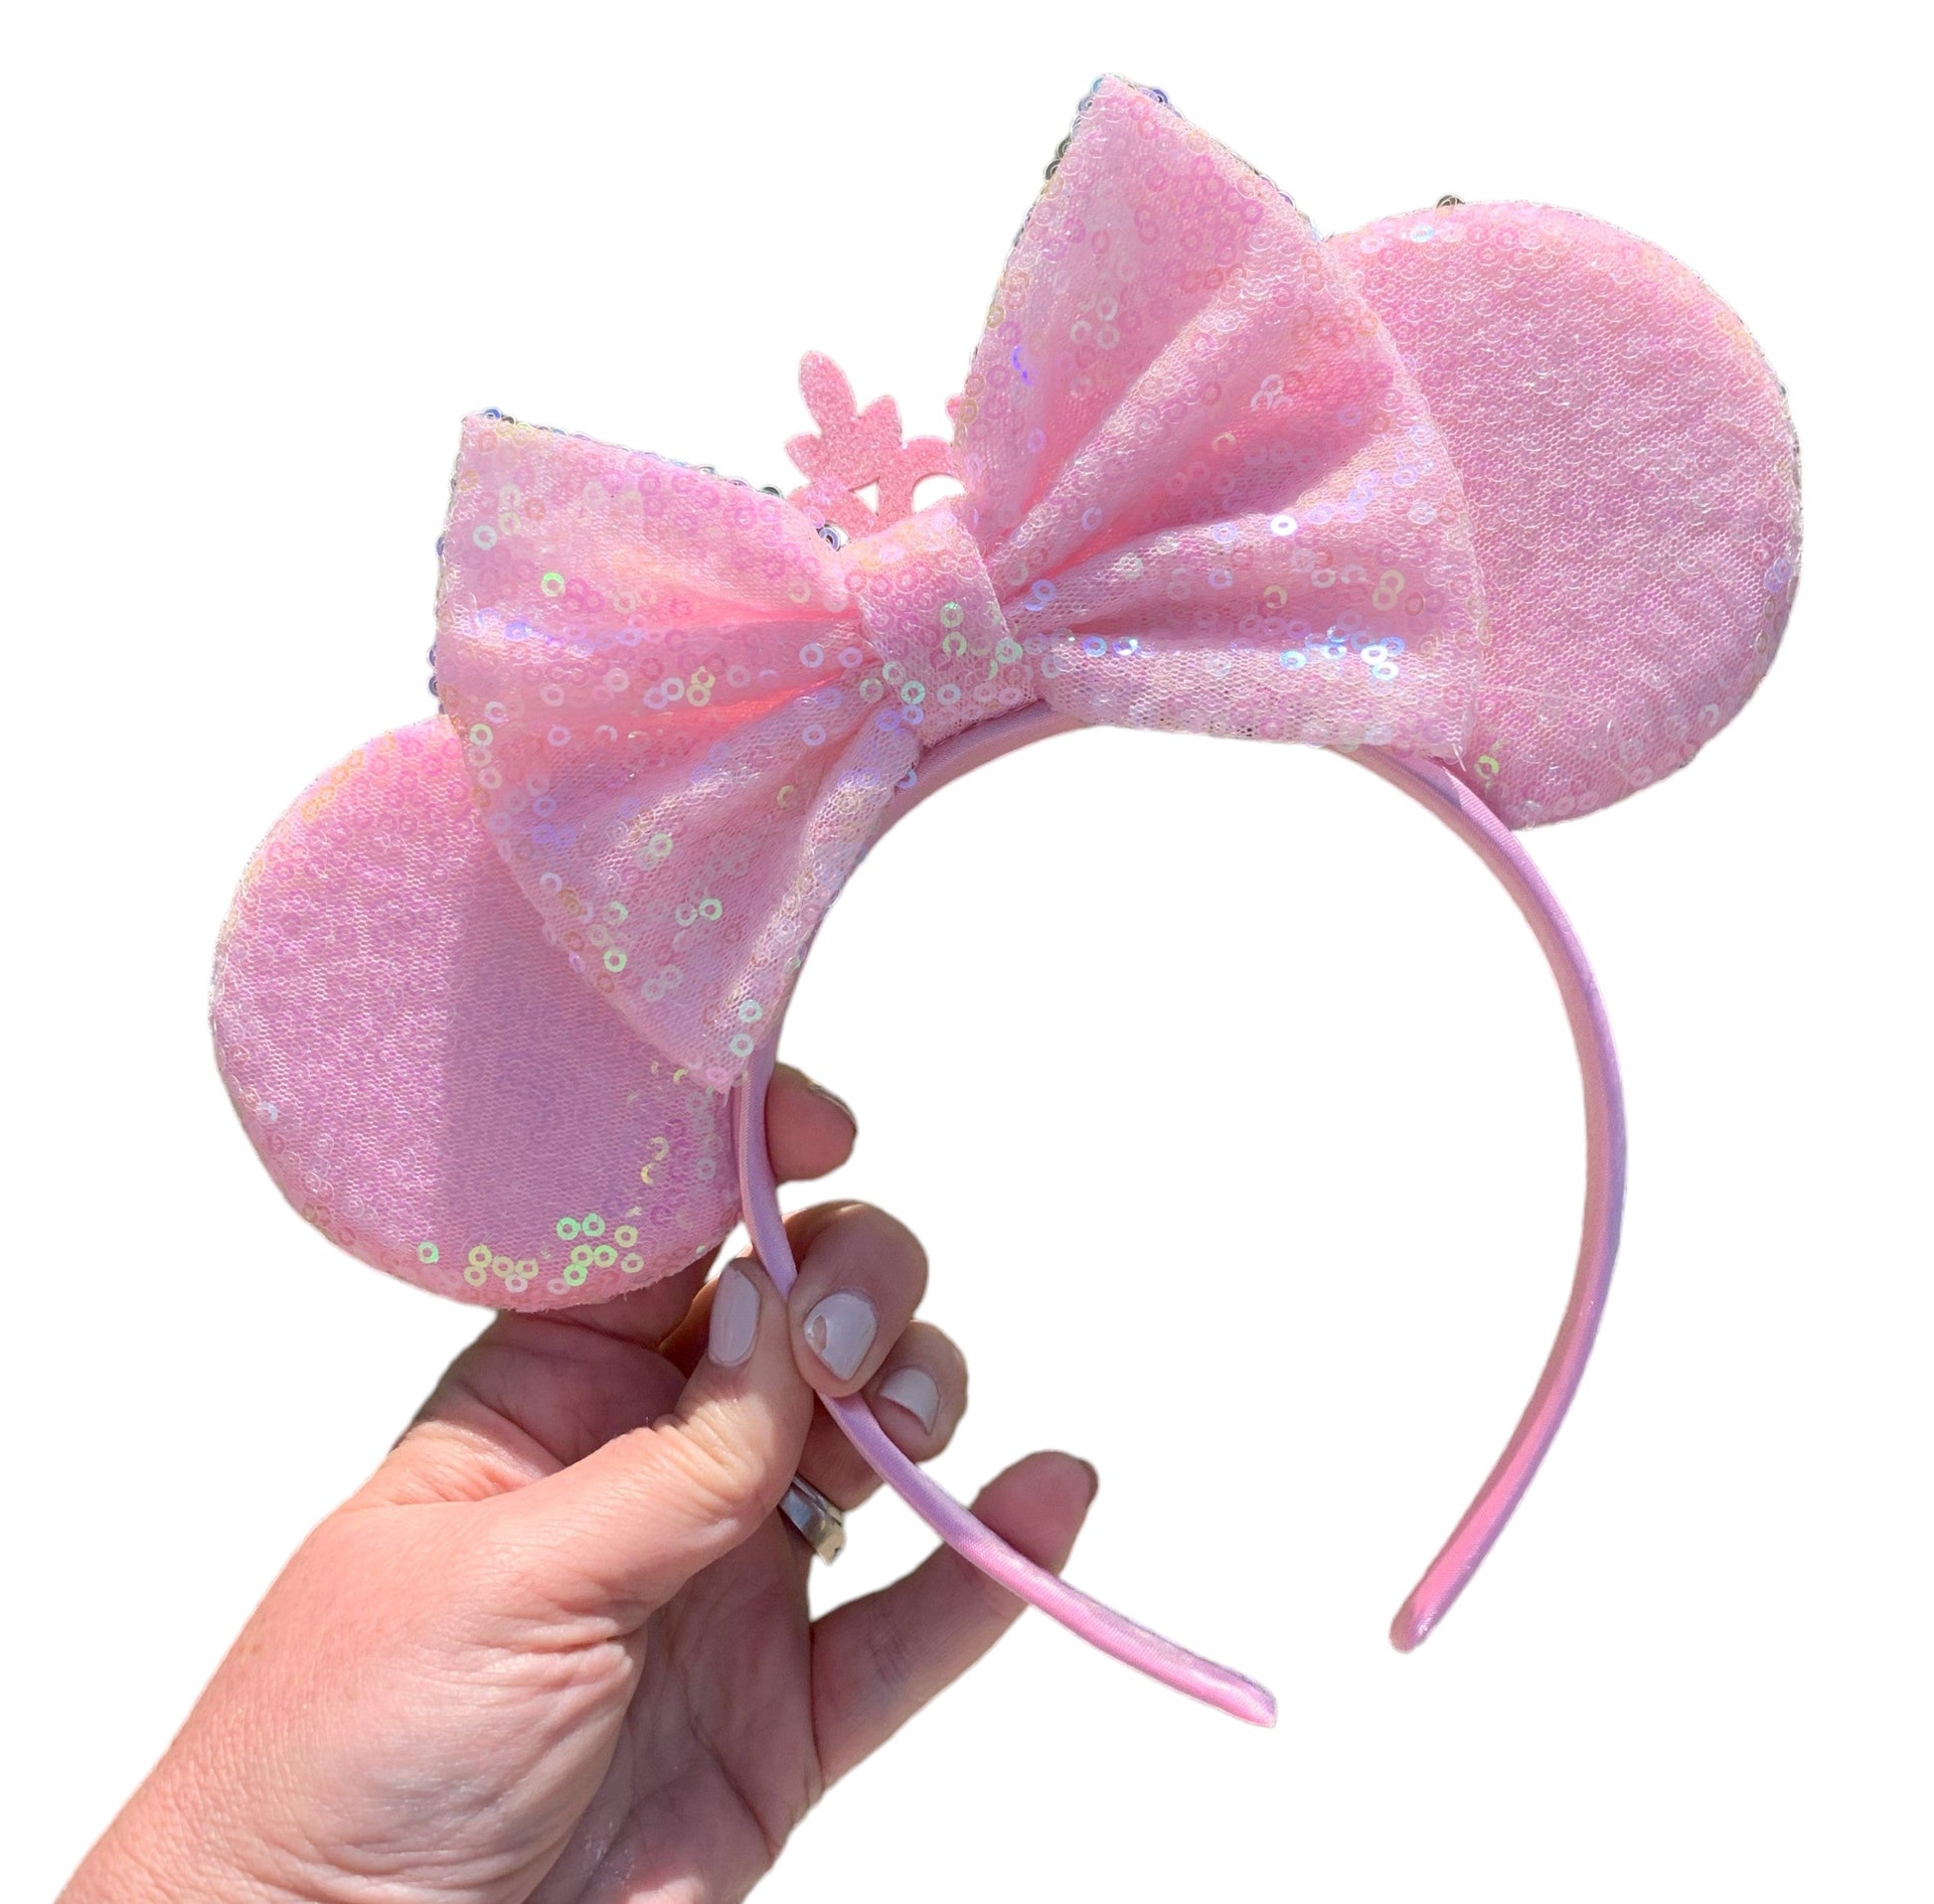 pink mouse ear headband with a pink crown